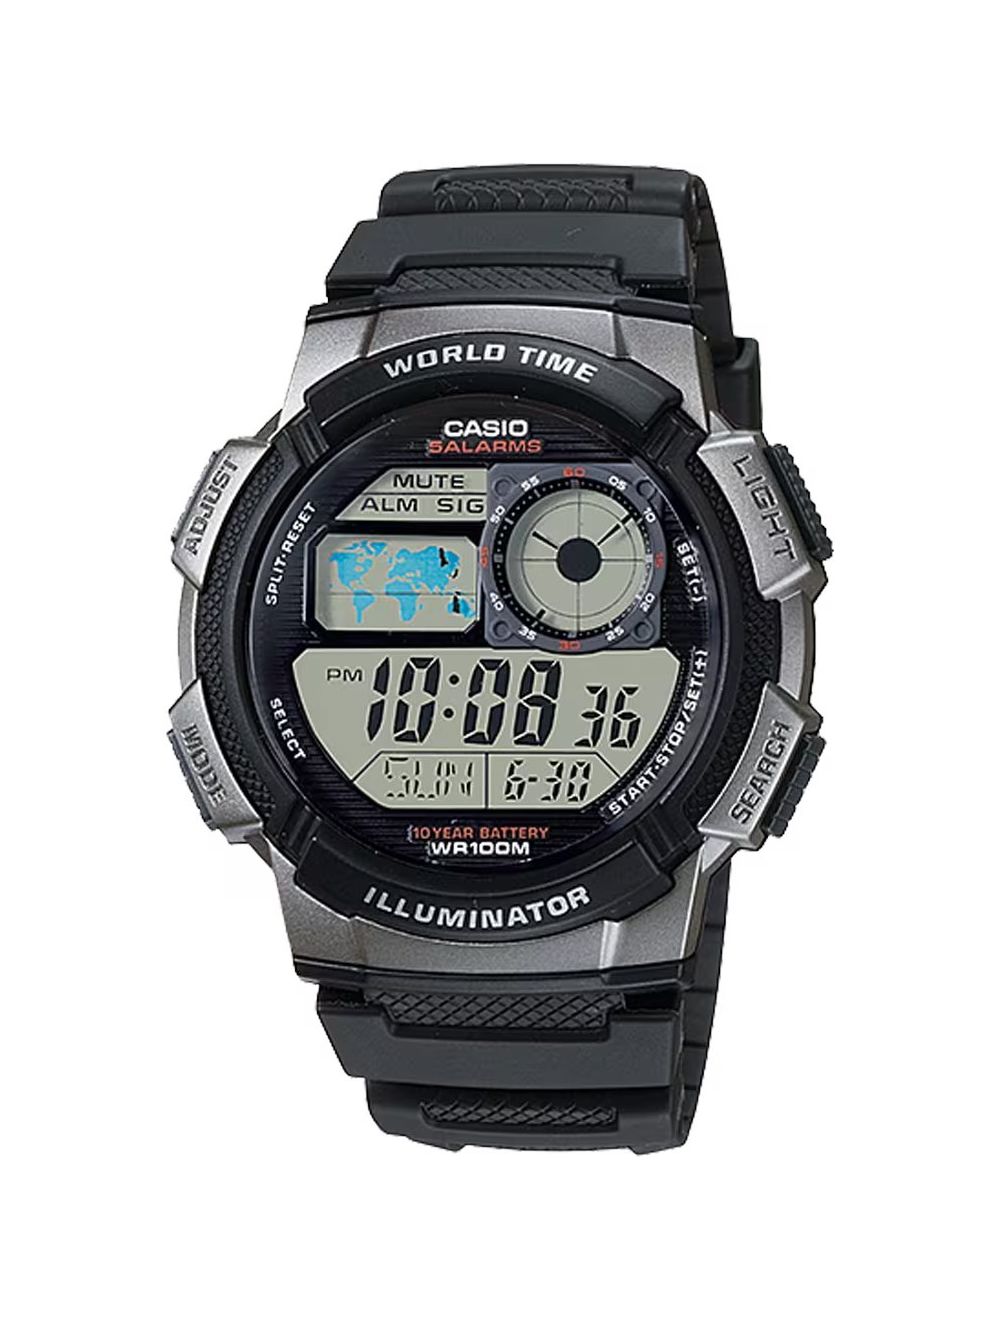 Classic World Time Digital Watch w/ 100 Meter Water-Resistance